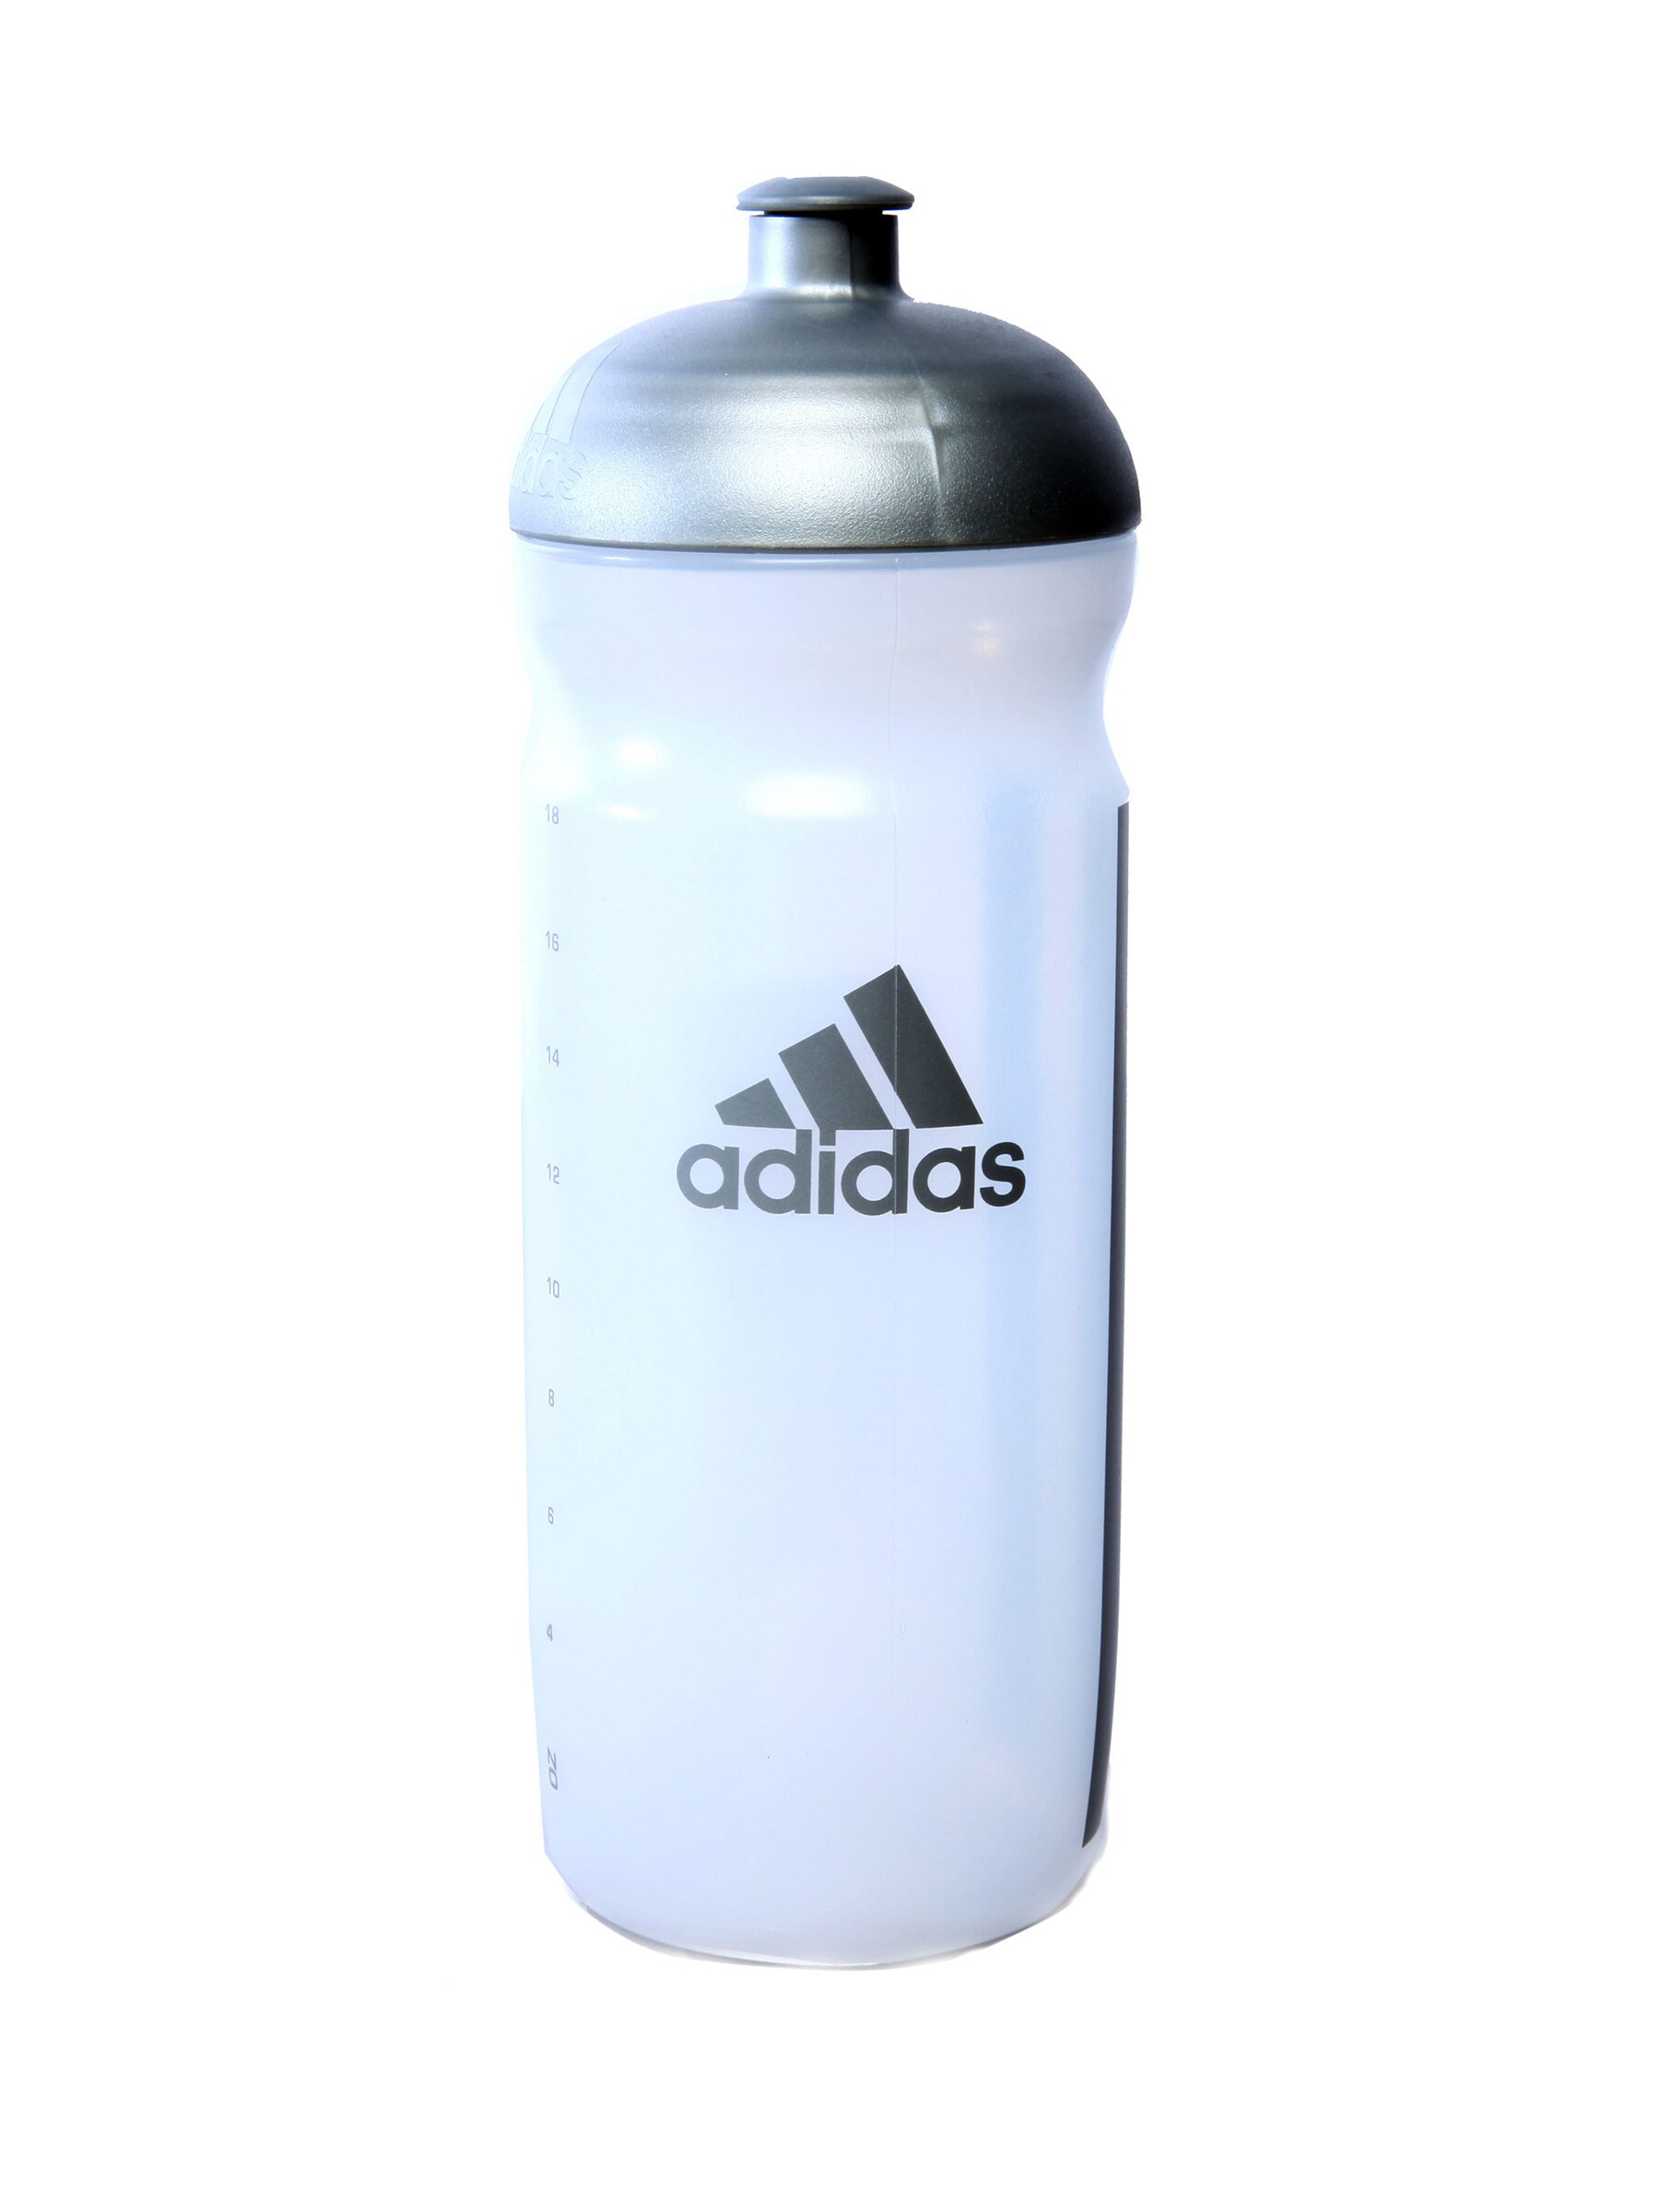 ADIDAS White Water Sipper